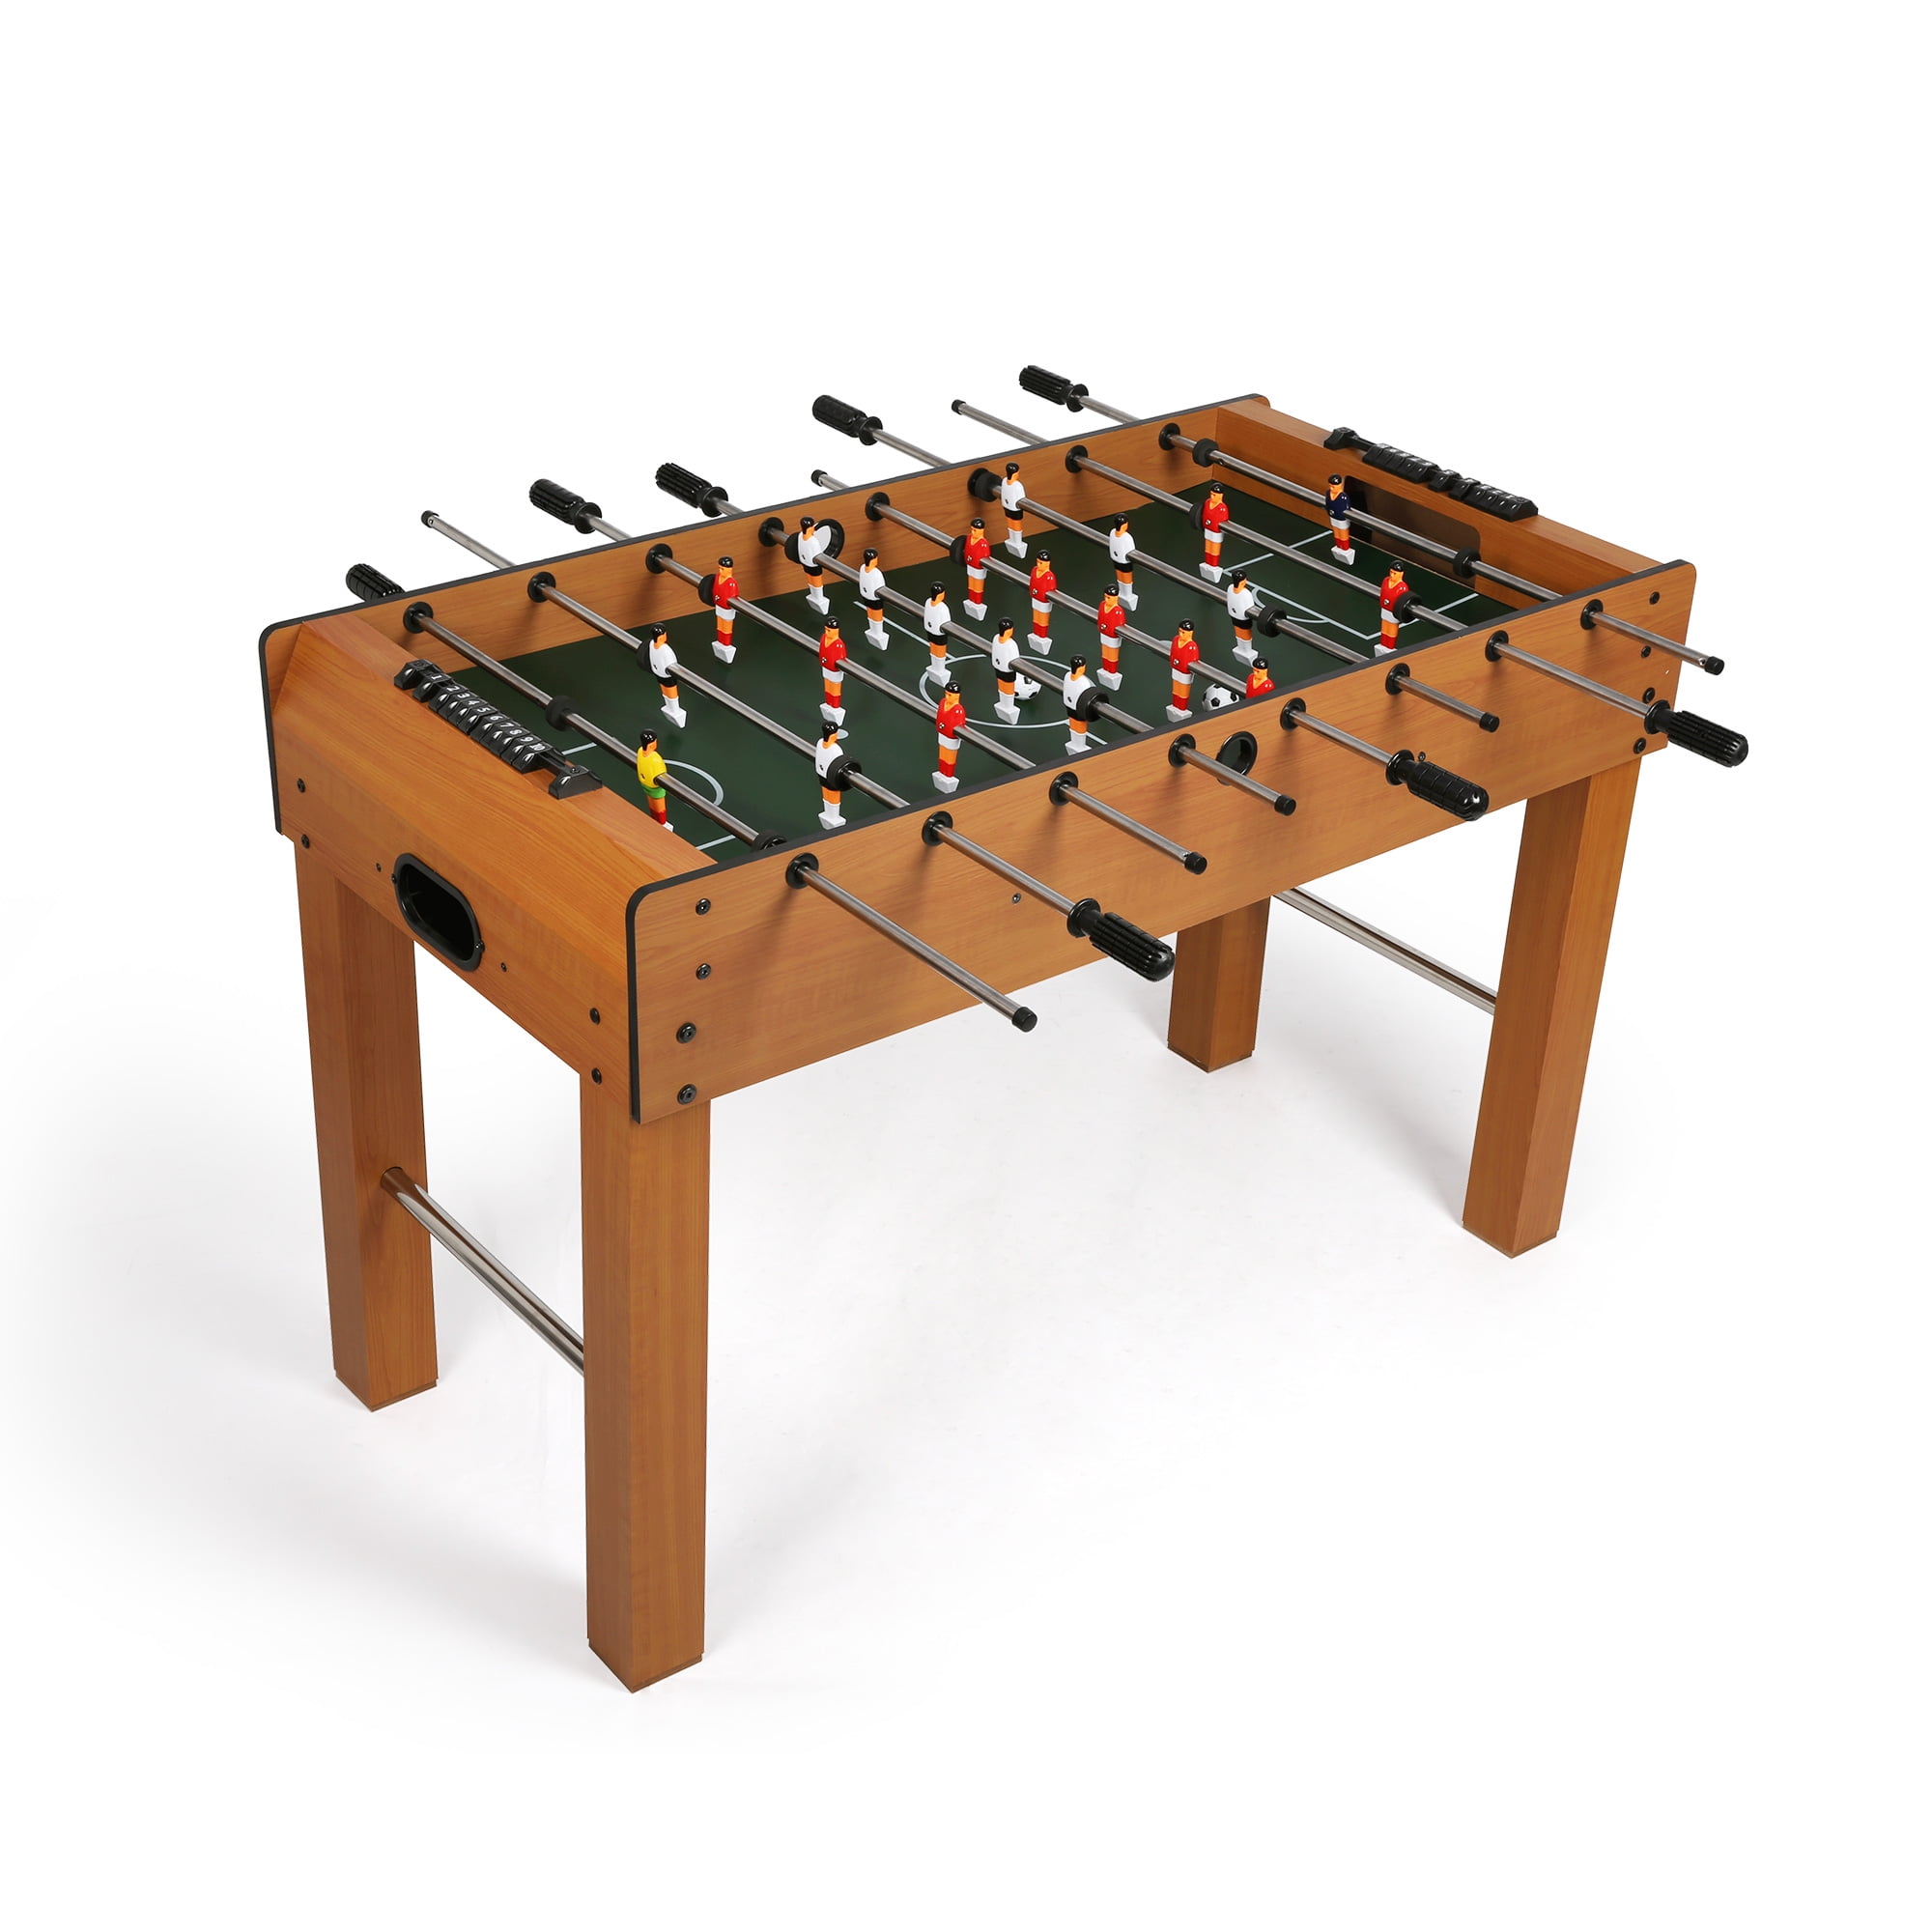 Foosball Soccer Table Official Competition Sized Game Table Family Fun Home Play 